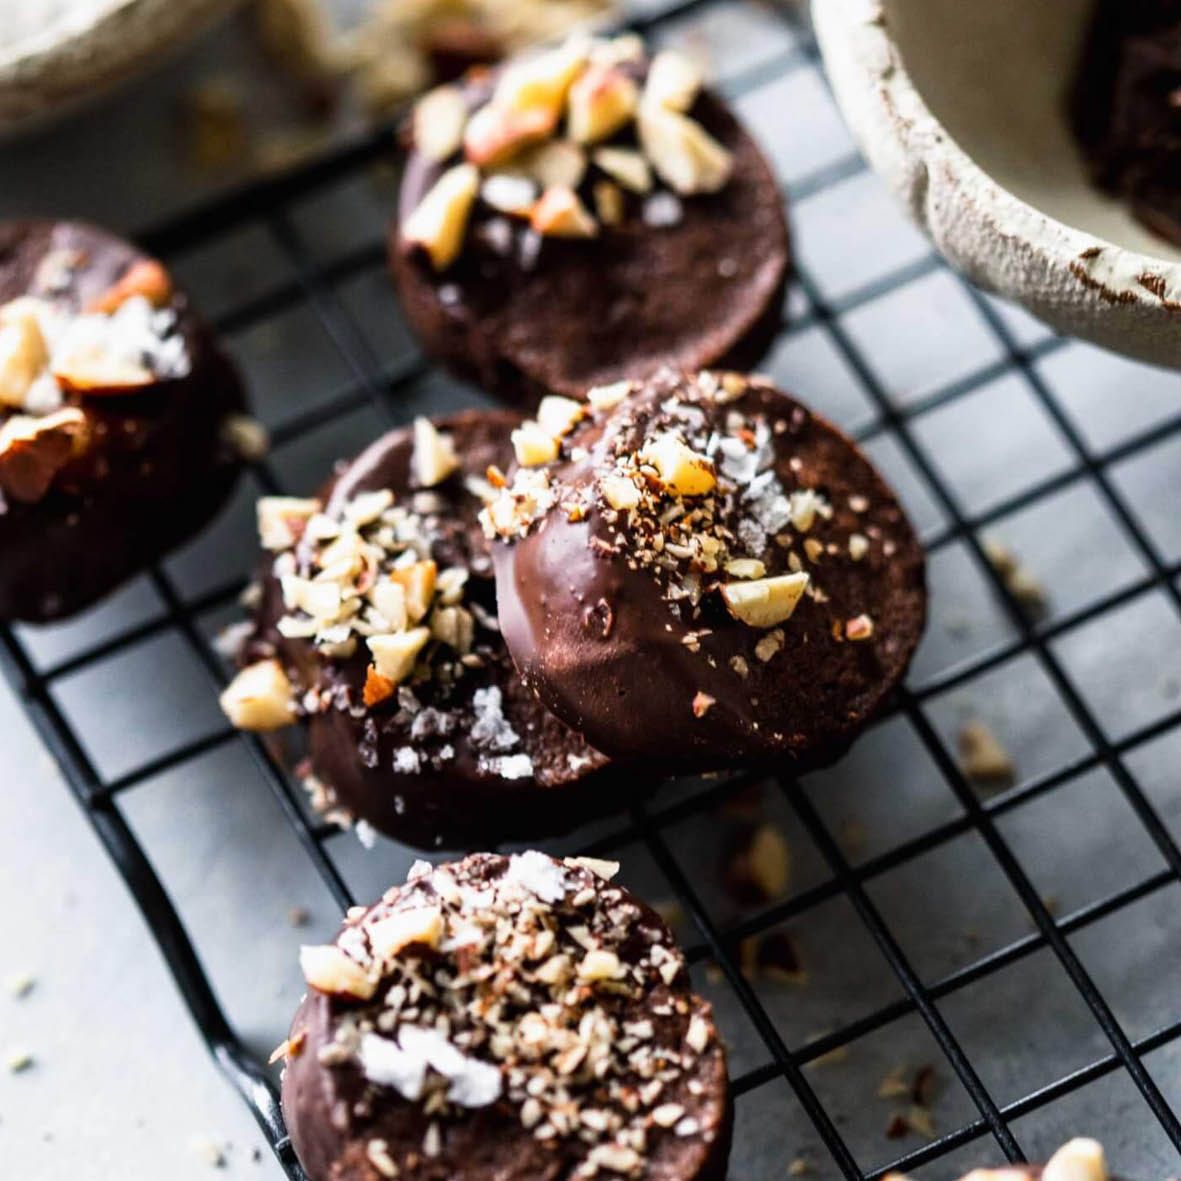 Chocolate_Covered_Shortbread_Biscuits_with_Hazelnuts_and_Sea_Salt.jpg